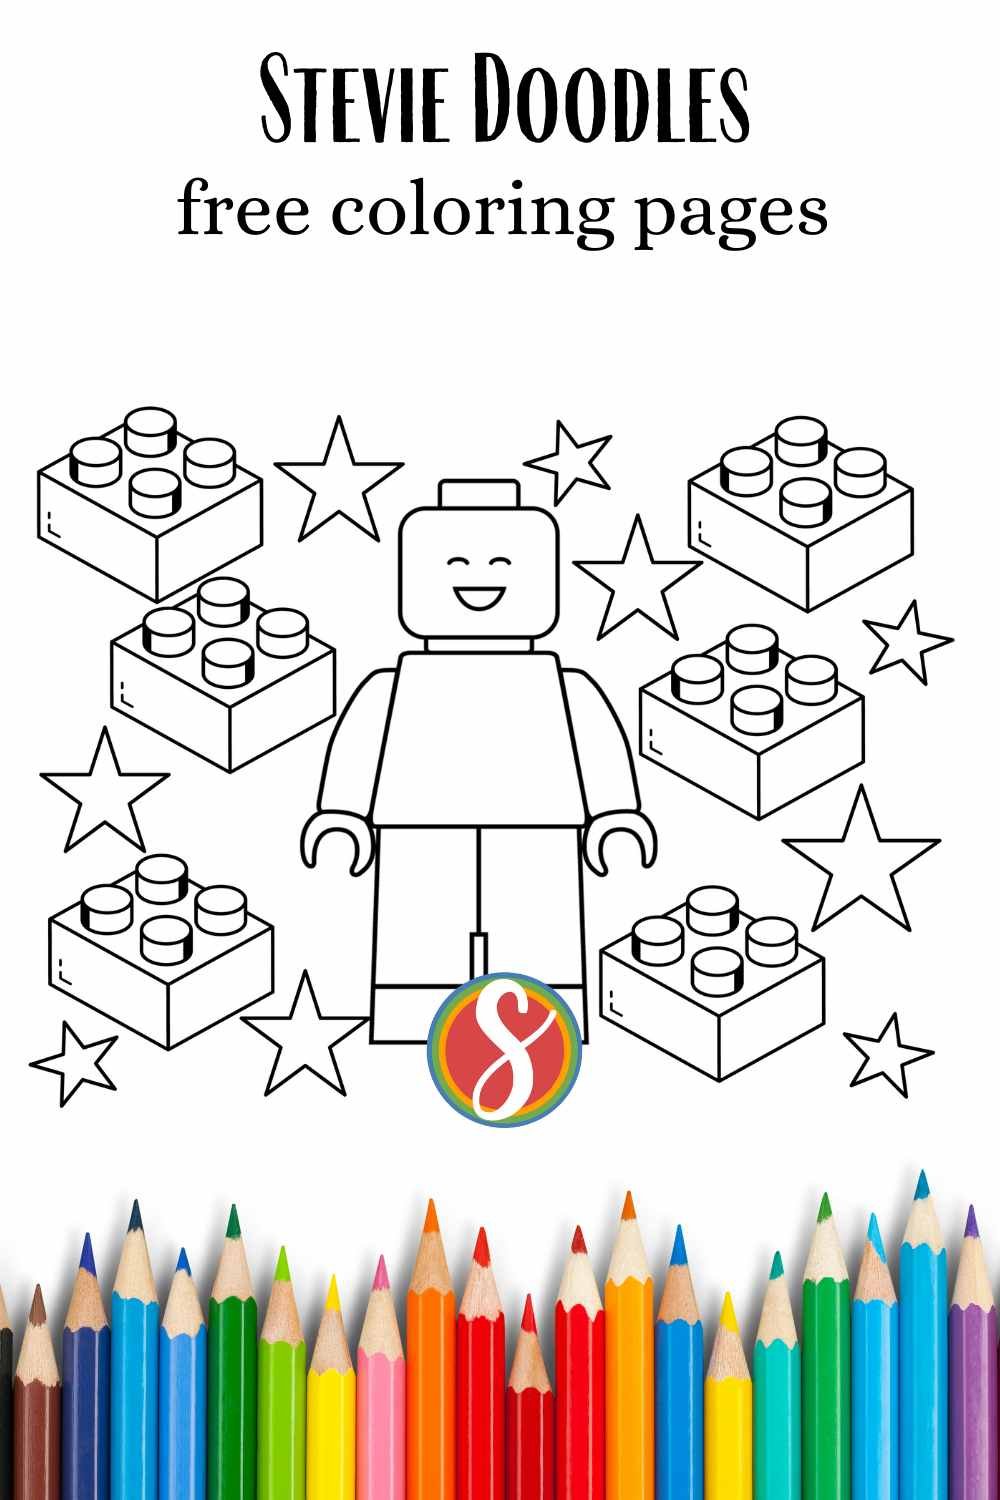 colorable lego man centered surrounded by colorable stars and lego bricks